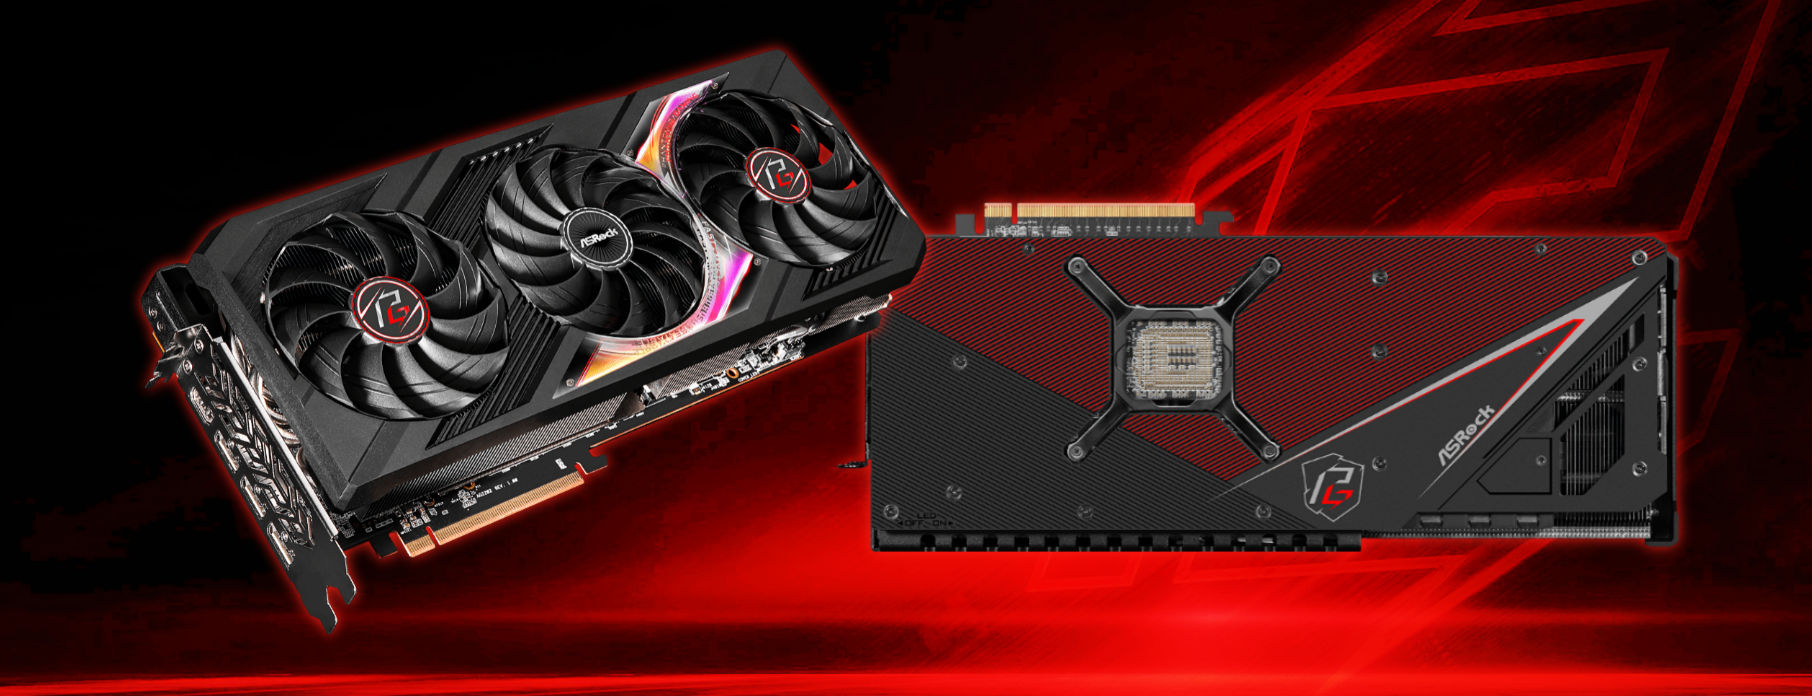 Reviews Of The Radeon RX 7800 XT Have Been Published